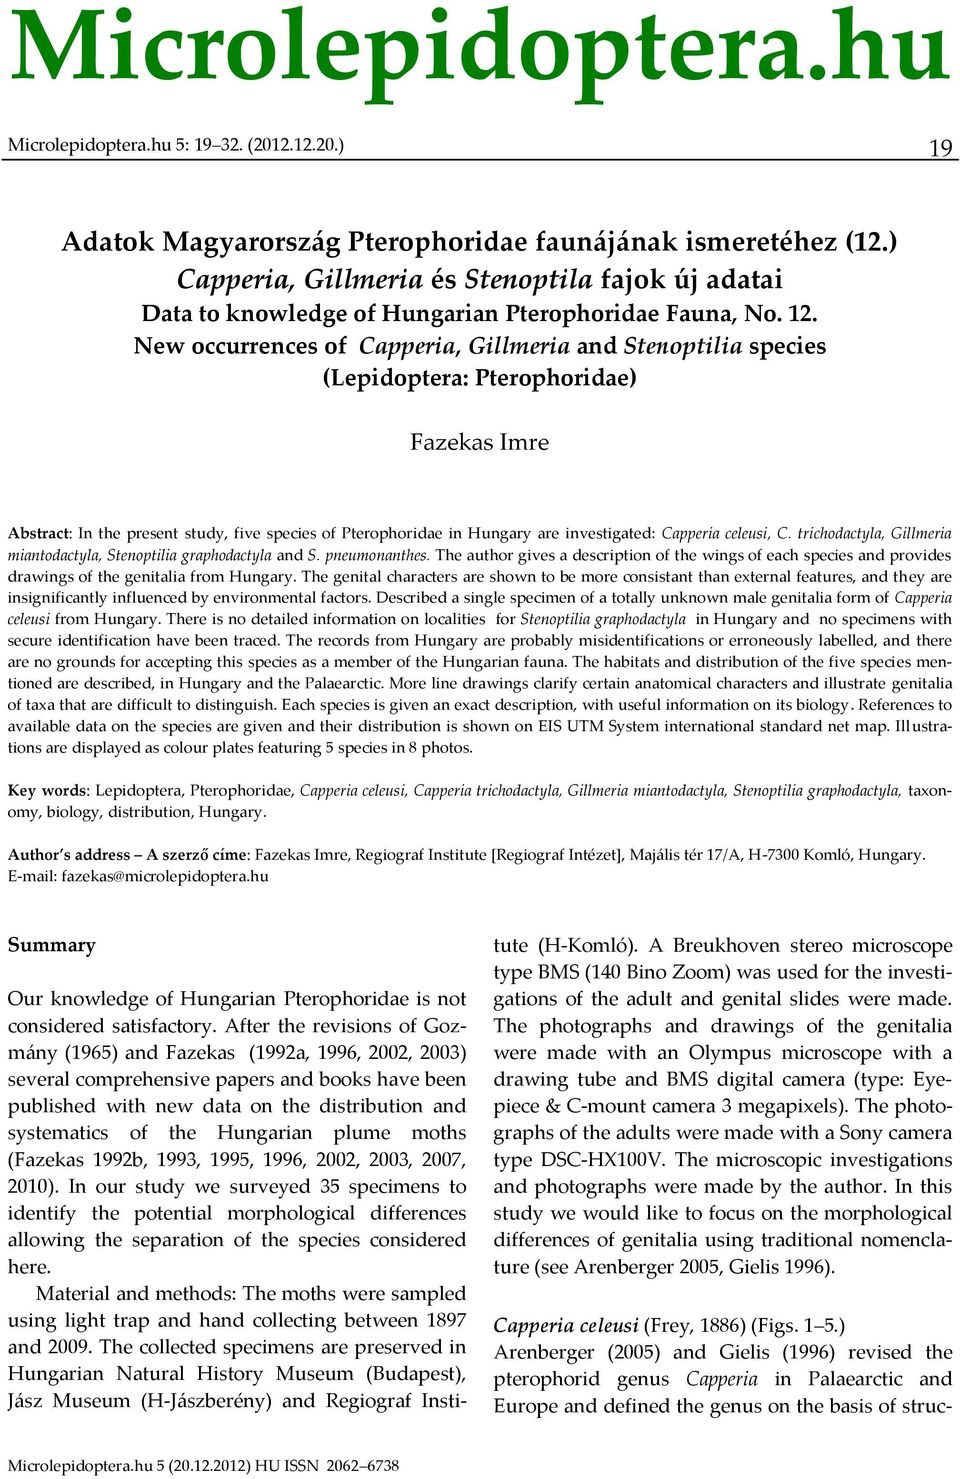 New occurrences of Capperia, Gillmeria and Stenoptilia species (Lepidoptera: Pterophoridae) Fazekas Imre Abstract: In the present study, five species of Pterophoridae in Hungary are investigated: